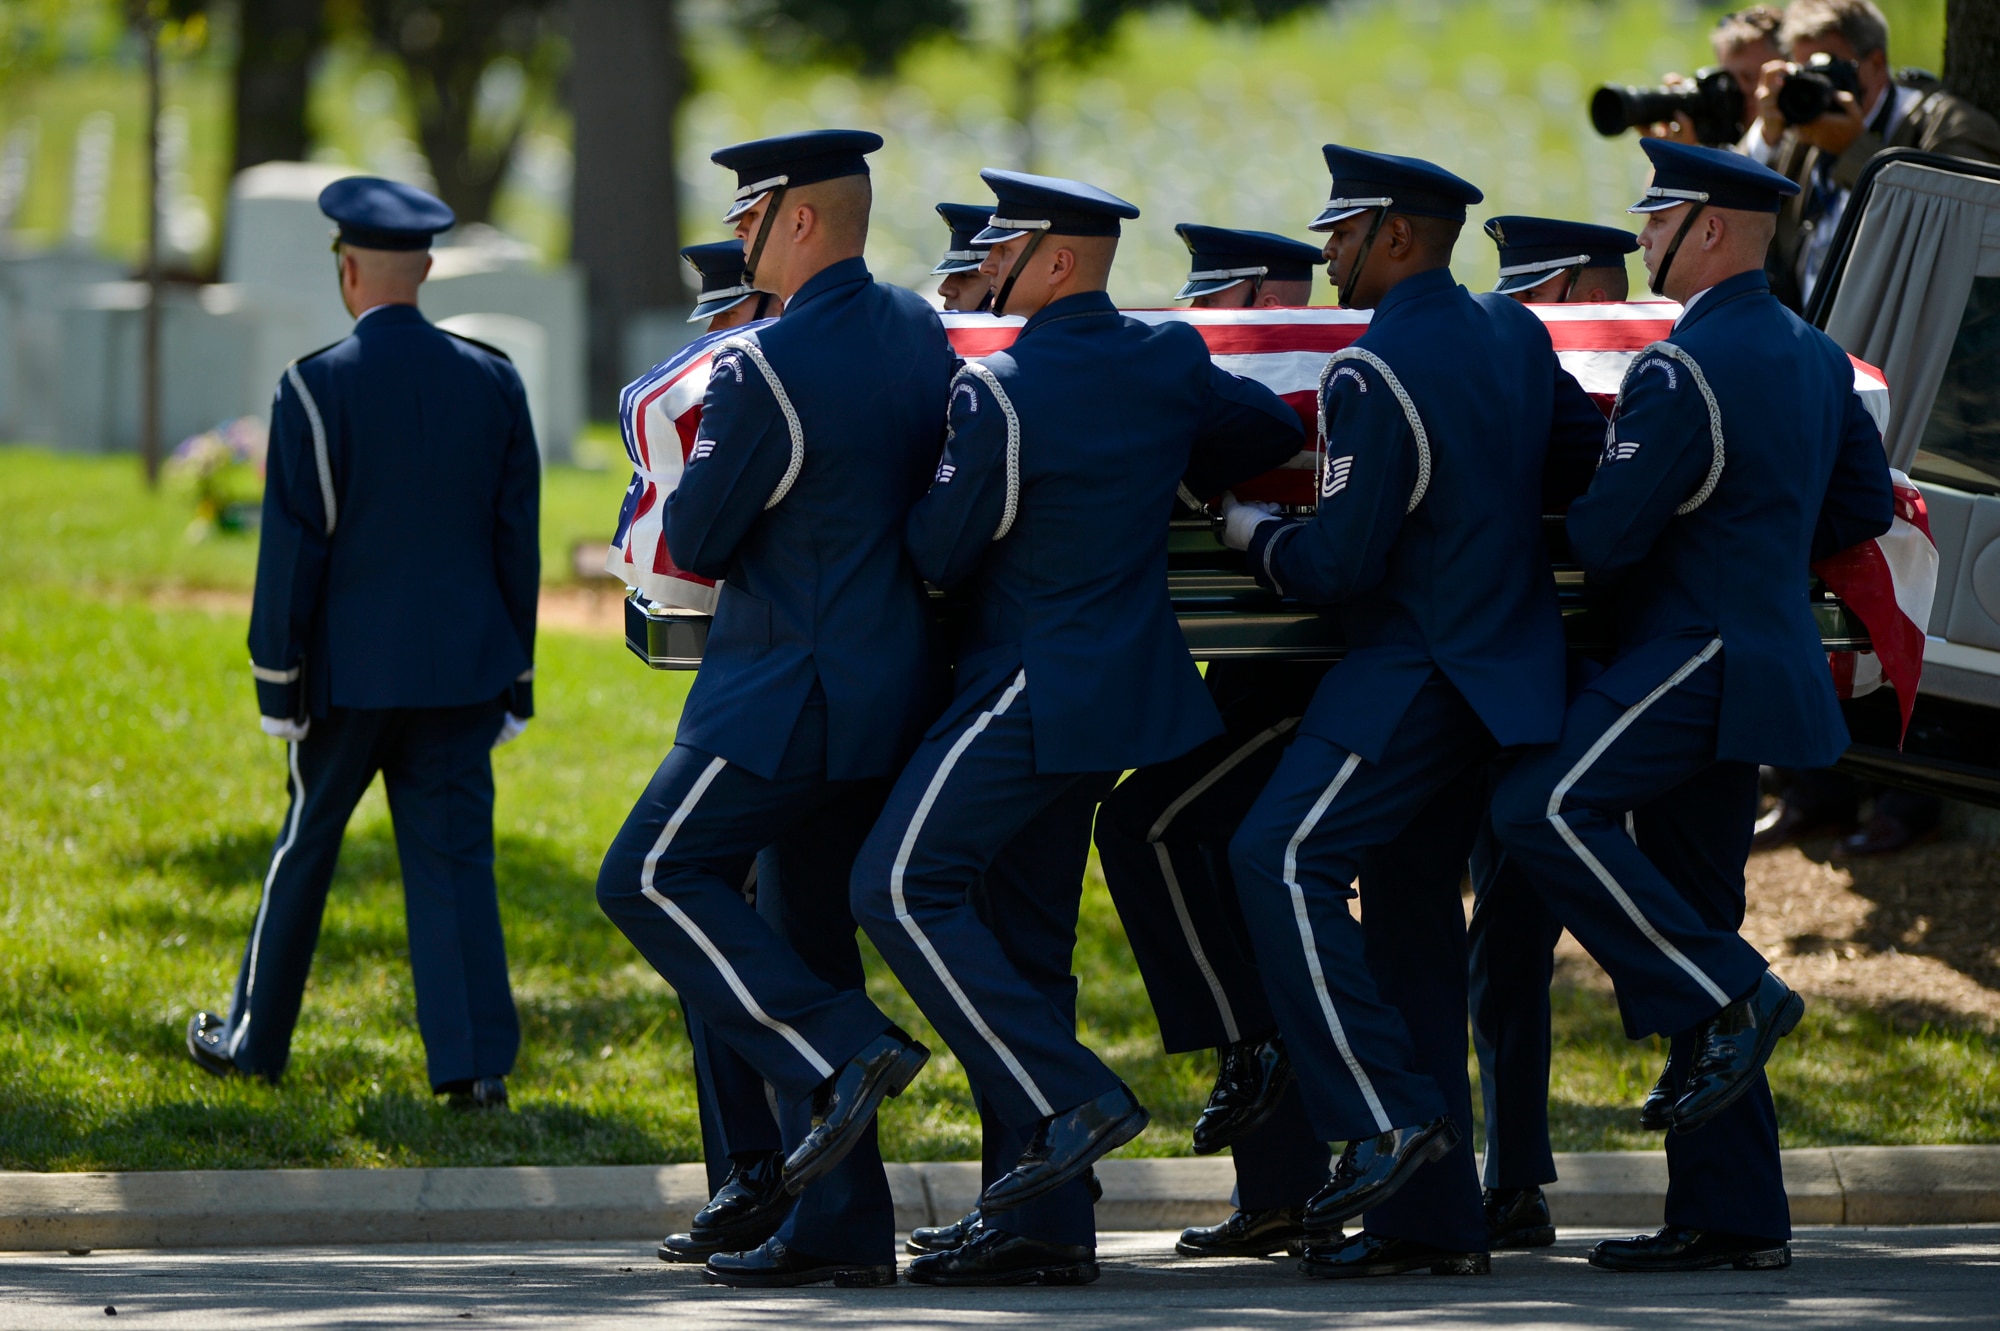 U.S. Air Force Honor Guard pallbearers carry former 2nd Lt. Malvin G. Whitfield, an Army Air Corps and Air Force veteran, to his burial site at Arlington National Cemetery in Arlington, Va., on June 8, 2016. Whitfield became the first active-duty U.S. military member to win gold medals in international track and field competitions when he competed at the 1948 Olympic Games in London, and in the 1951 Pan American Games. He died on Nov. 19, 2015, at the age of 91. (U.S. Air Force photo/Tech. Sgt. Joshua L. DeMotts)